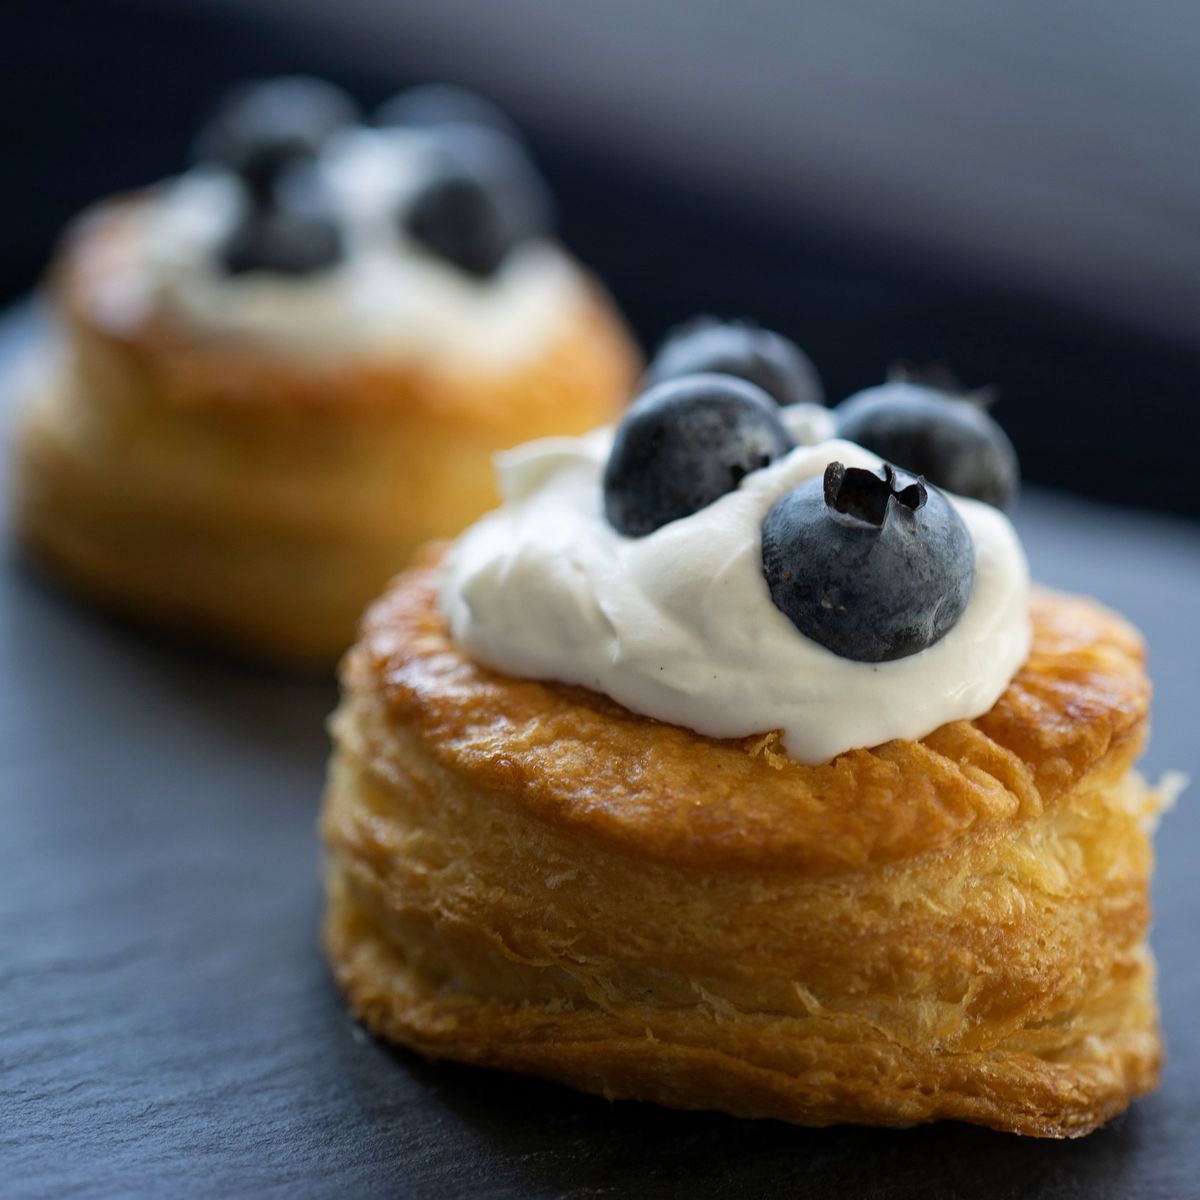 Open Kitchen | Pastry Series: Puff Pastry | Tuesday July 16